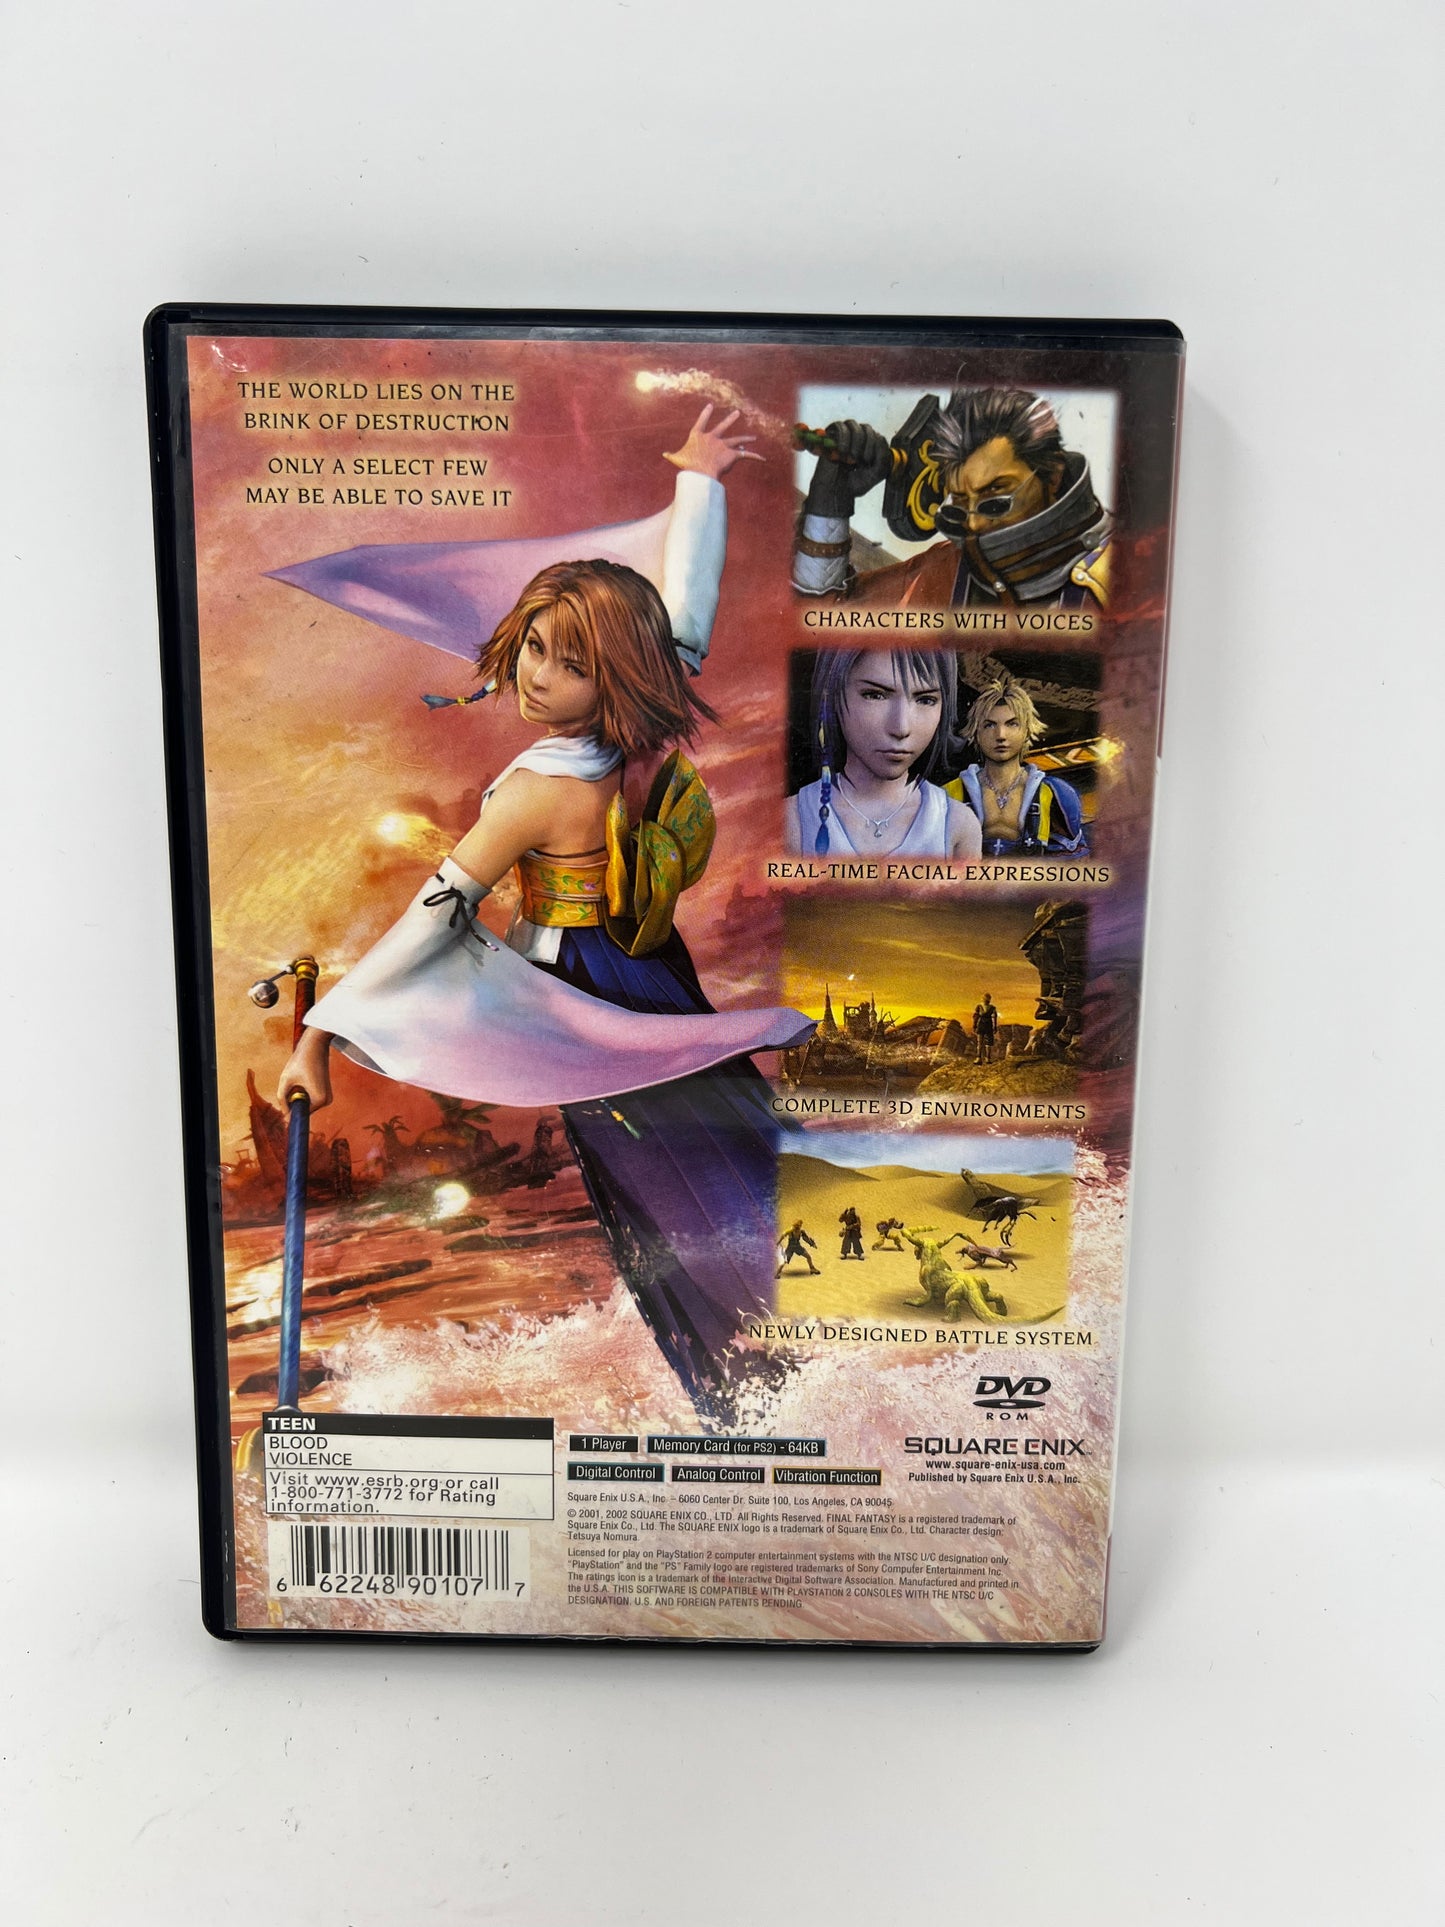 Final Fantasy X (Greatest Hits) - PS2 Game - Used